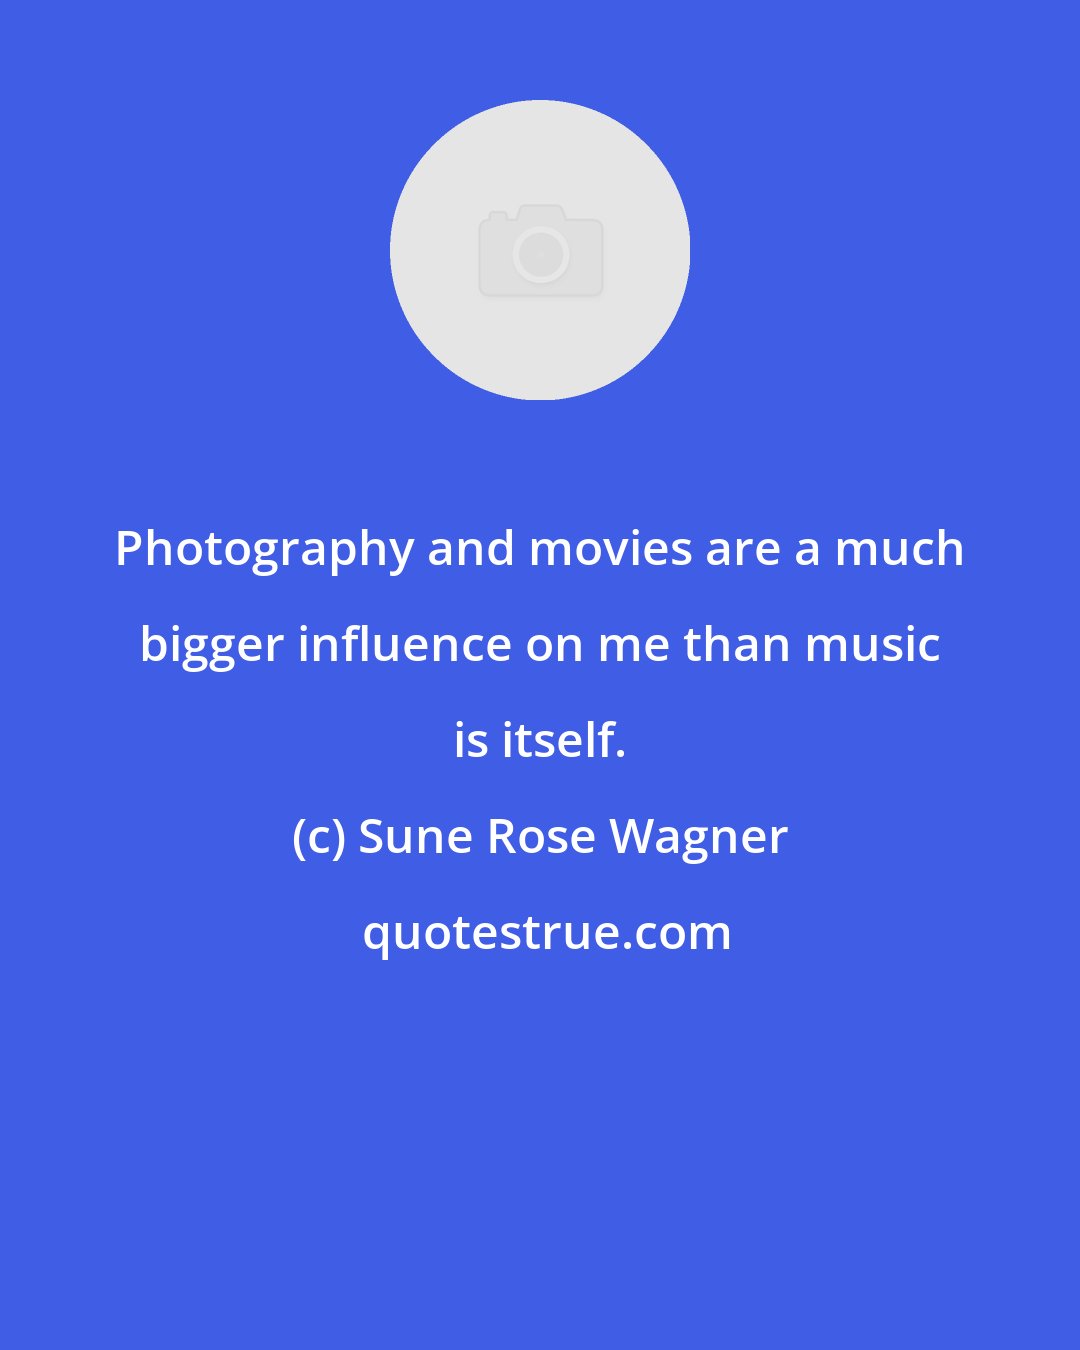 Sune Rose Wagner: Photography and movies are a much bigger influence on me than music is itself.